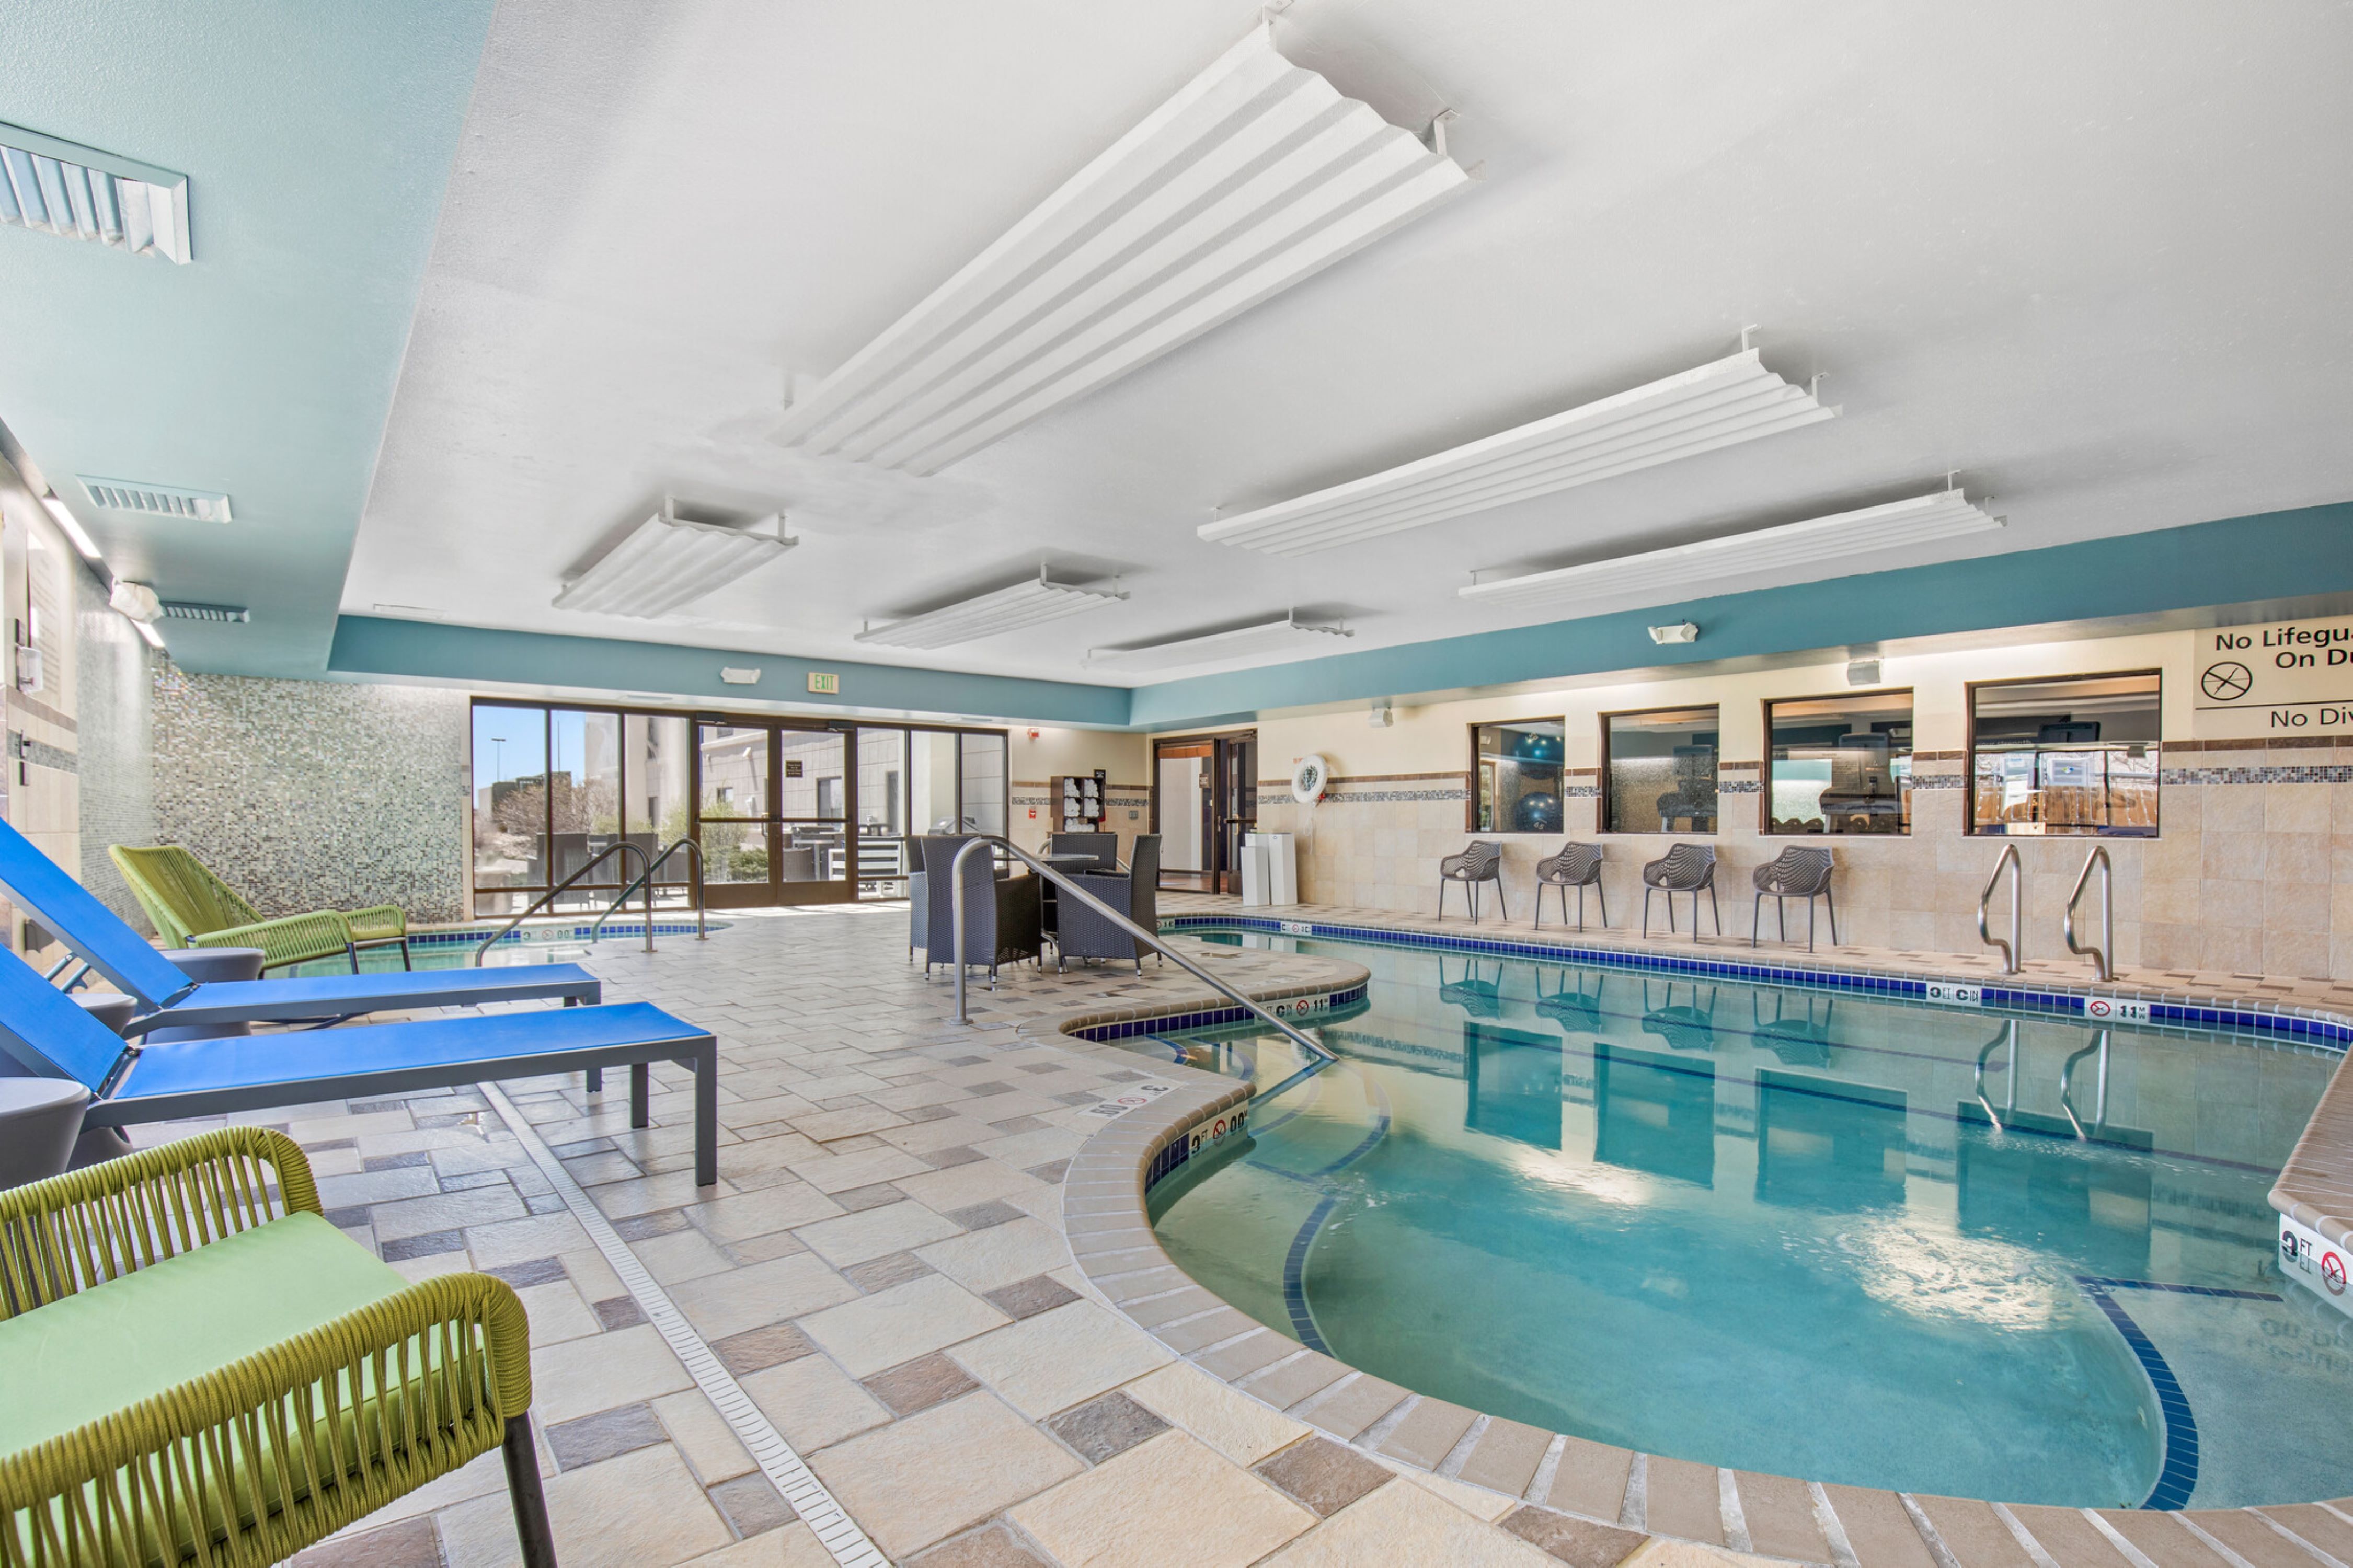 indoor pool and whirlpool